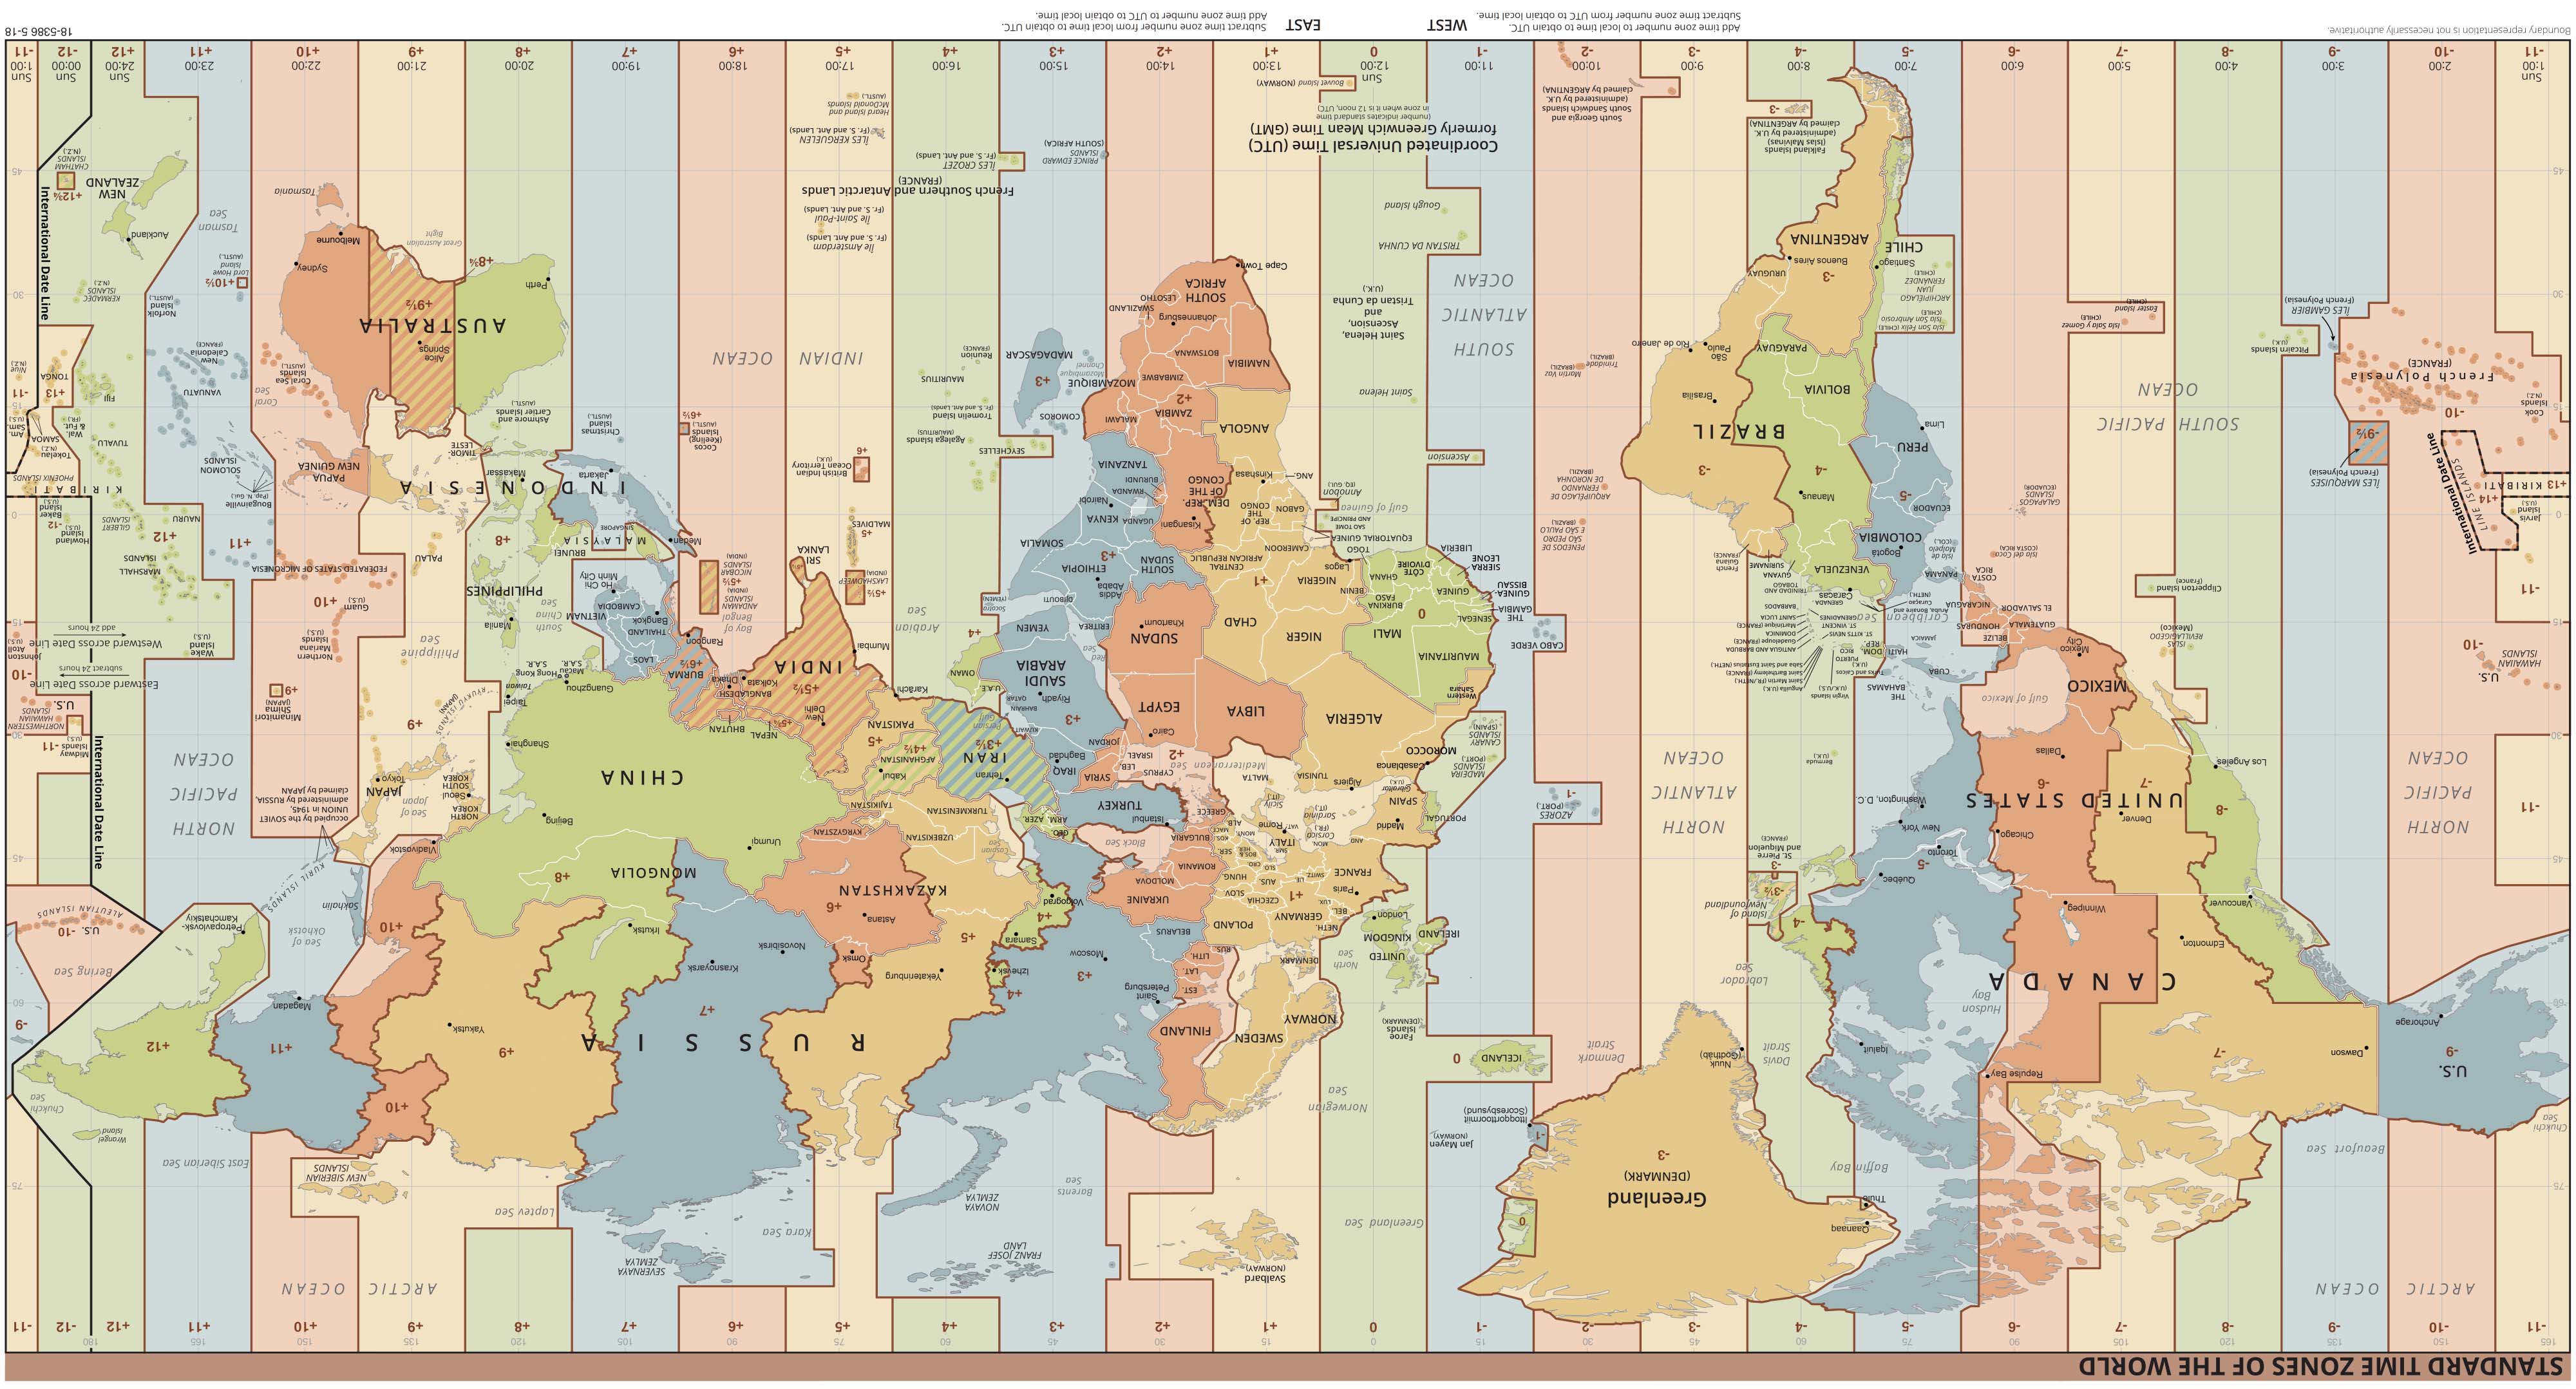 map of the world divided into its different time zone. Entire map appears here upside down